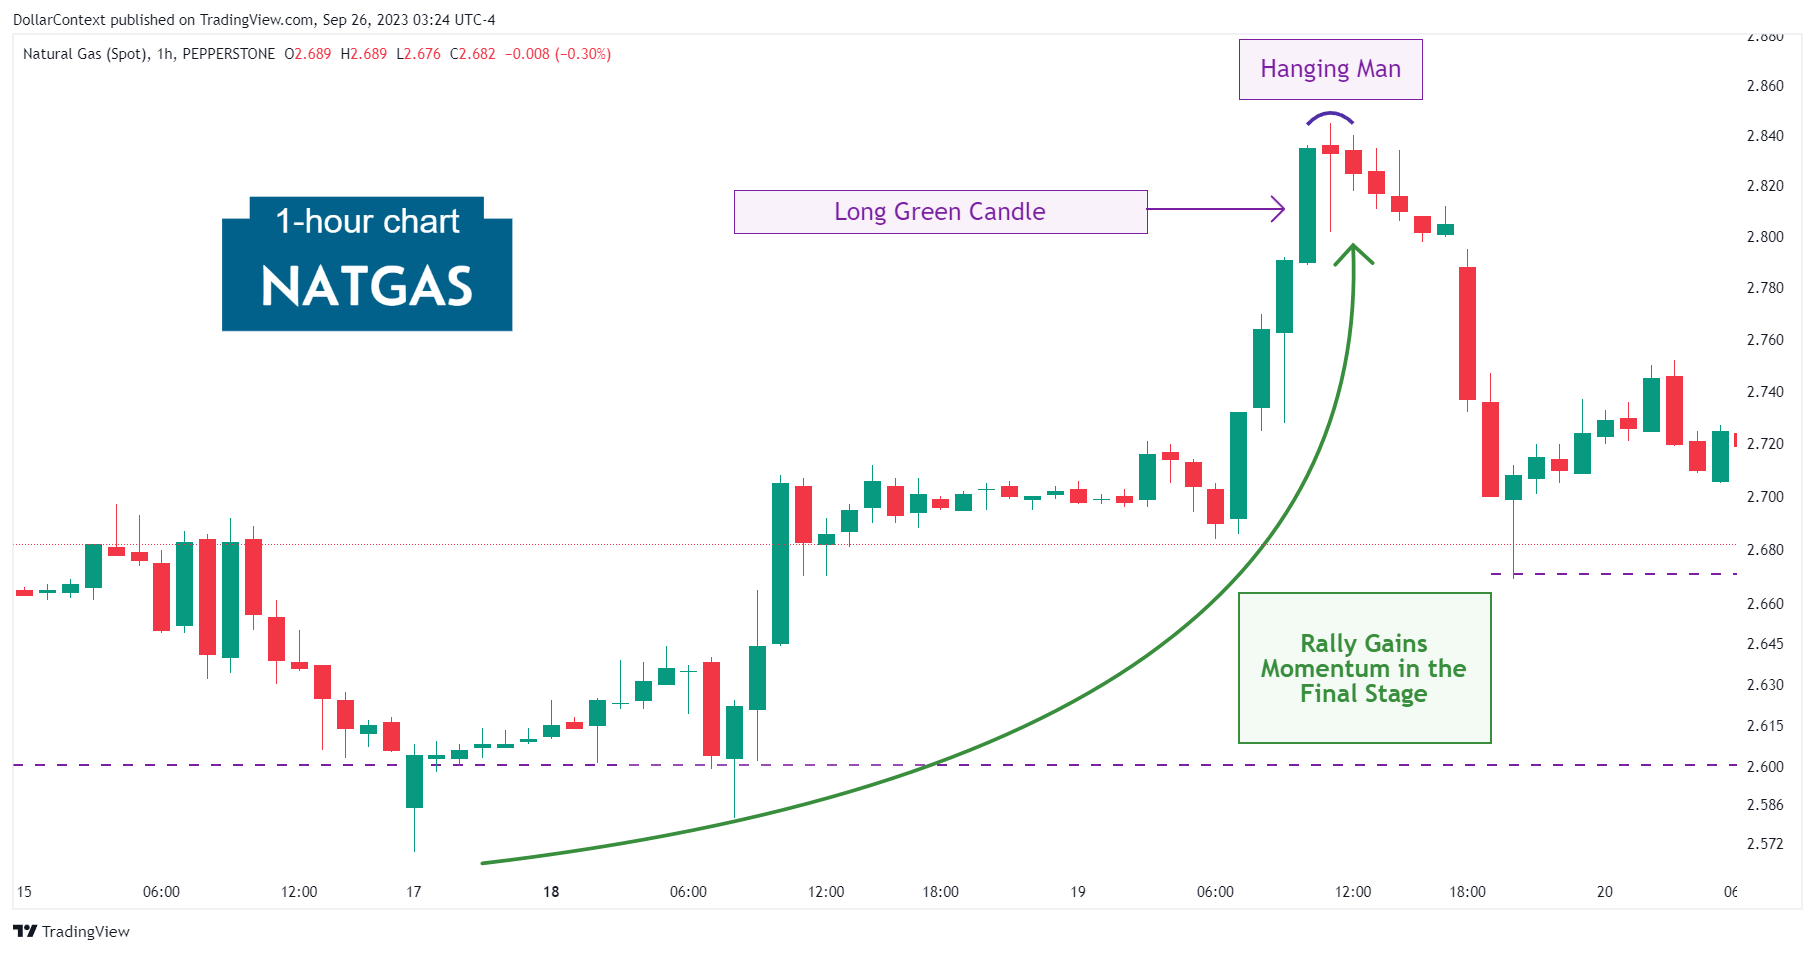 Natural Gas Futures: Hanging Man in September 2023 (Hourly Chart)